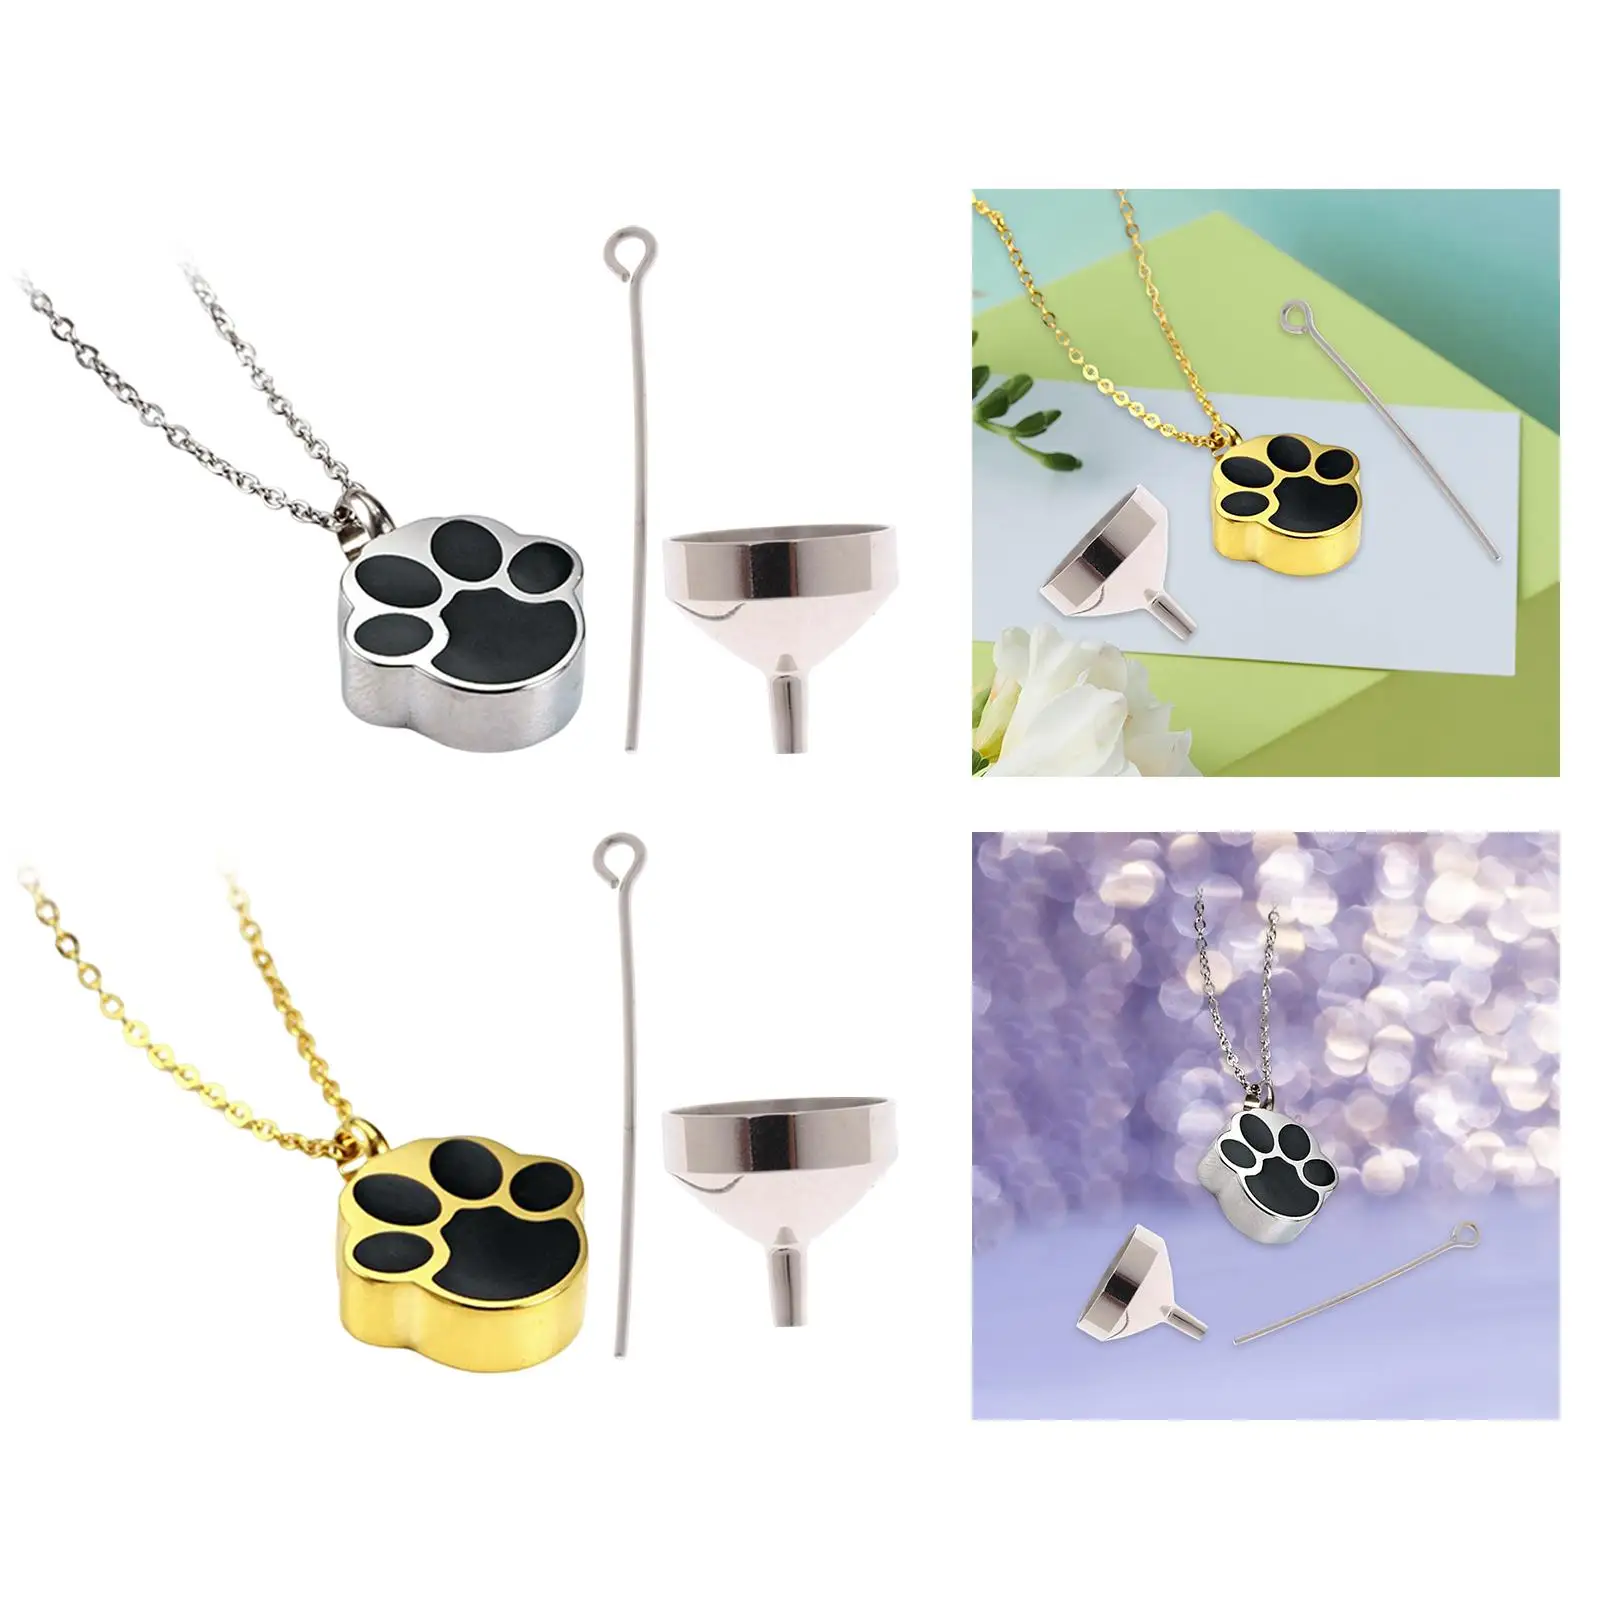  Shaped Ashes Holder Charms Openable Container Gift Cute with Funnel Waterproof Memorial Locket Pendant for Parents Woman Man